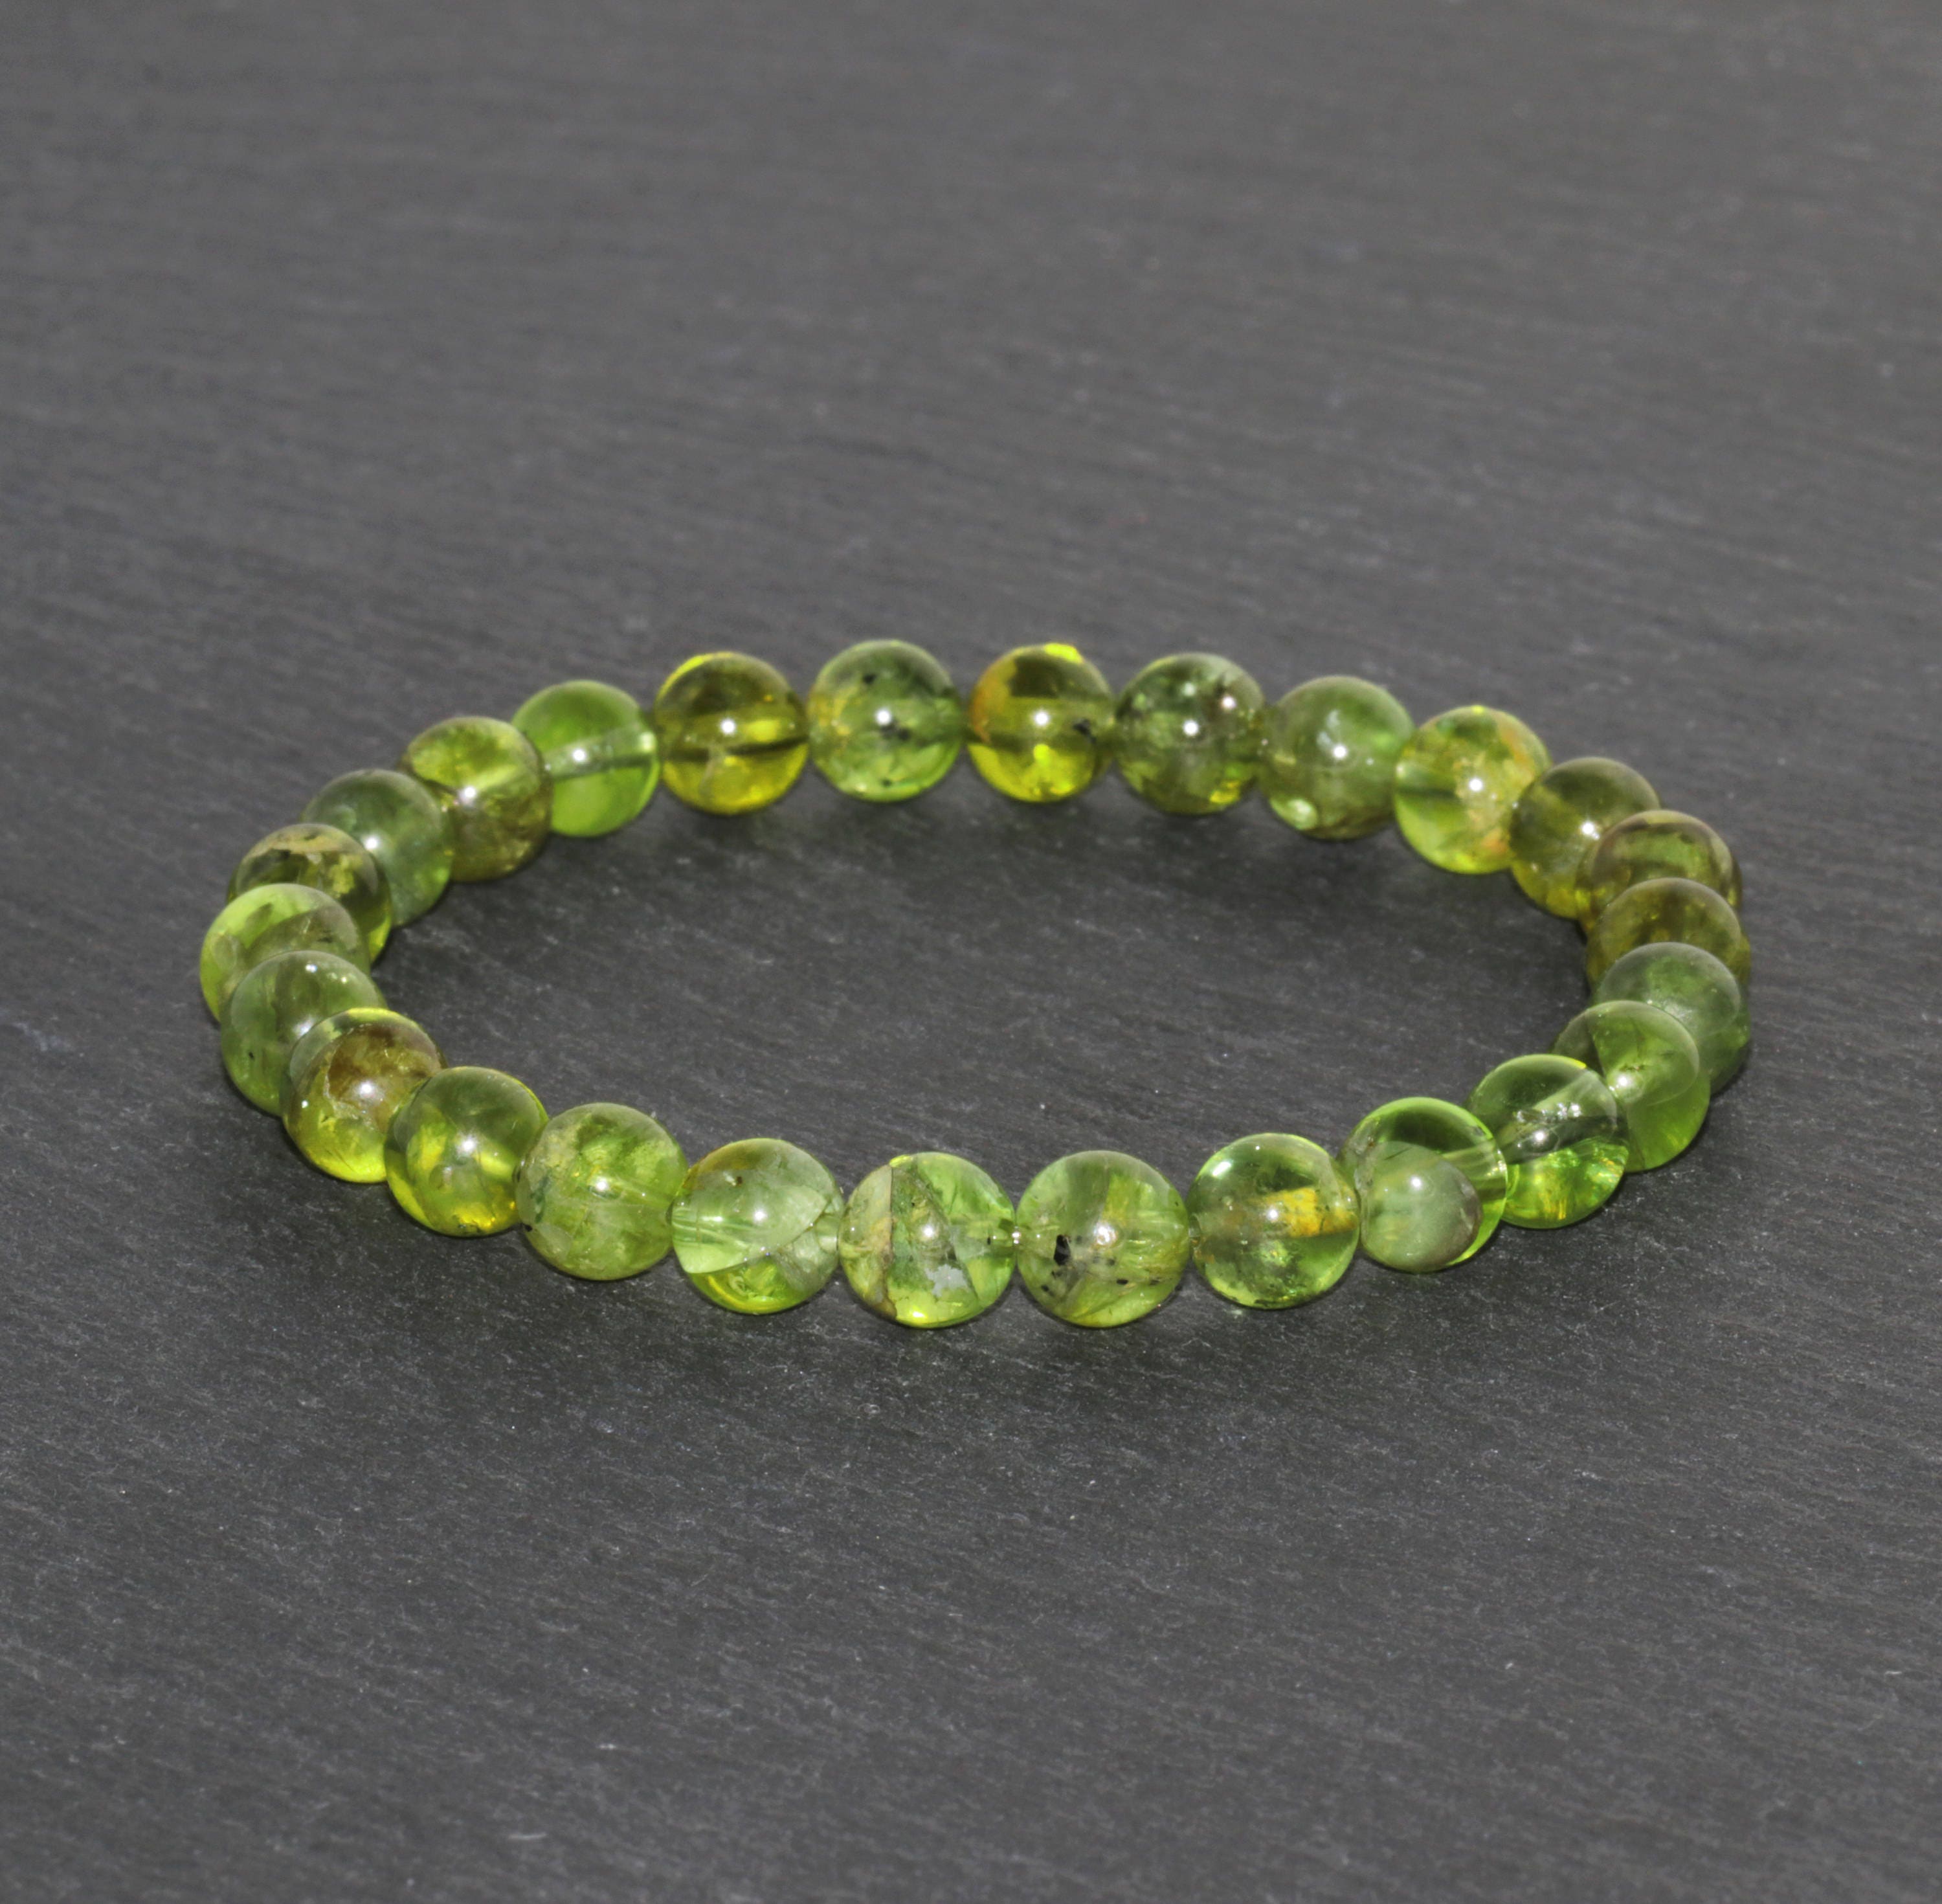 Amazon.com: Natural Green Peridot beaded bracelet for women Sterling Silver  Gemstone Beads Jewelry Crystal Healing : Handmade Products